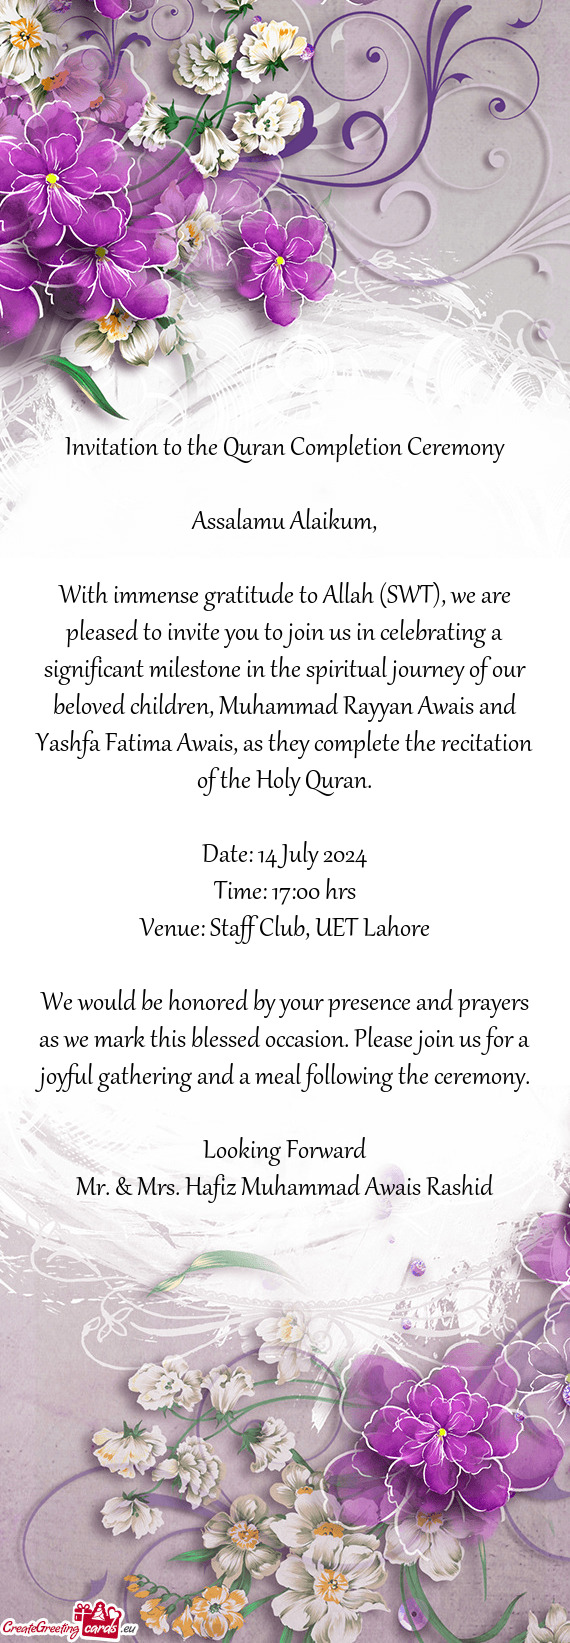 Invitation to the Quran Completion Ceremony